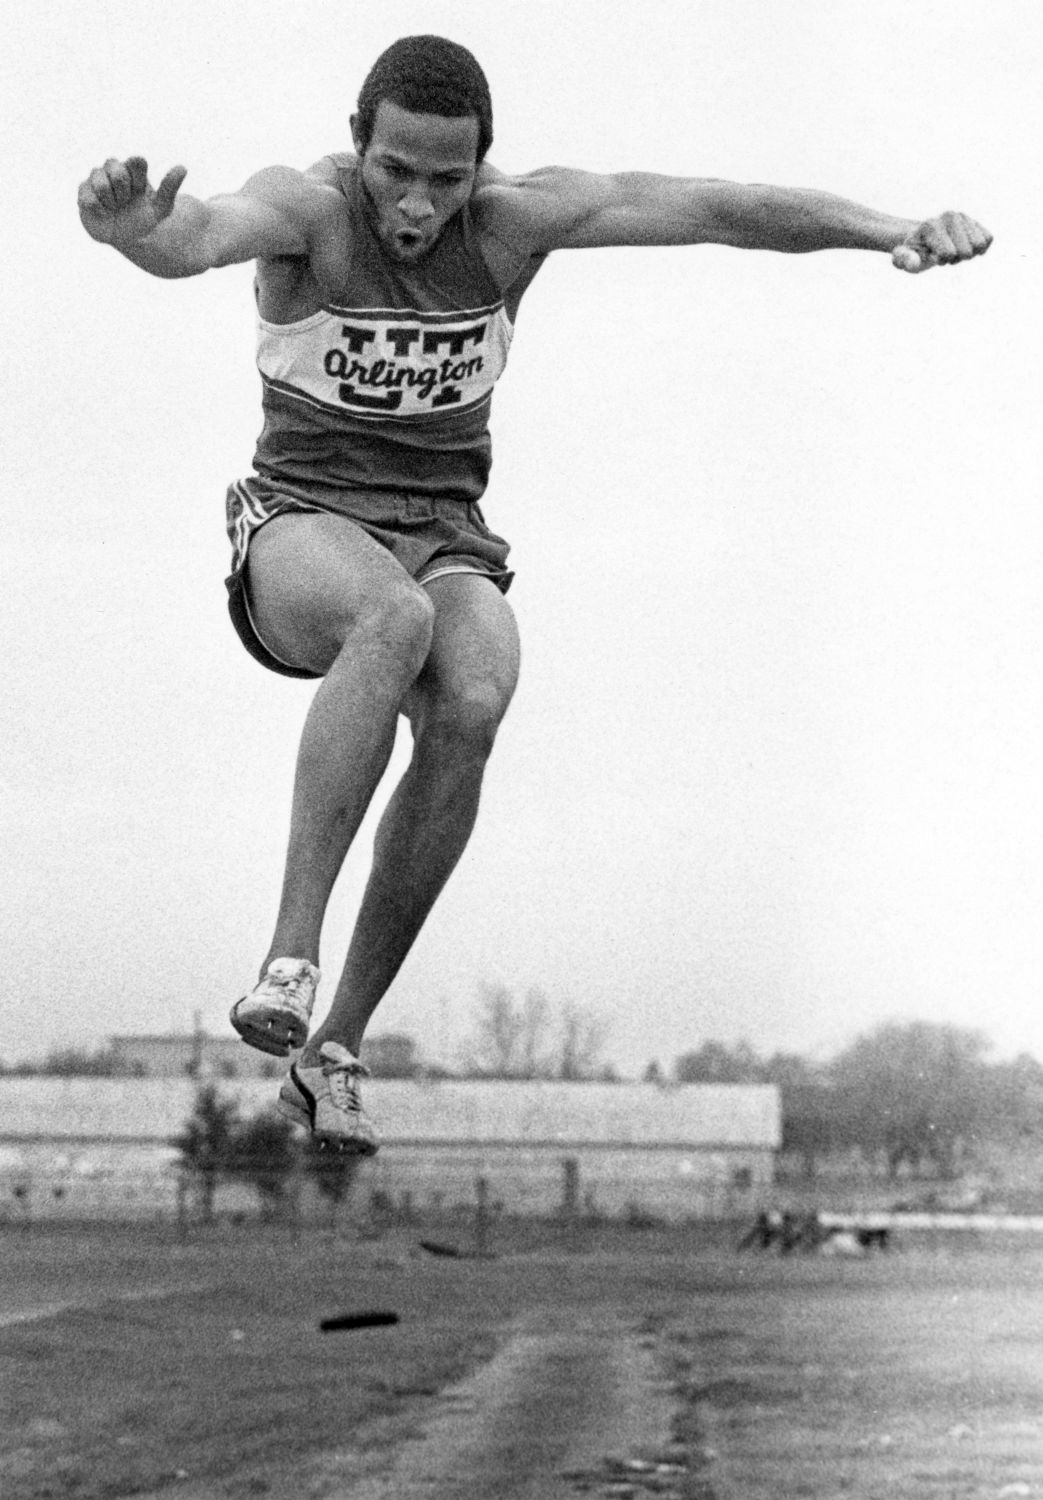 Black and white photo of a track meet with a track member seen jumping.